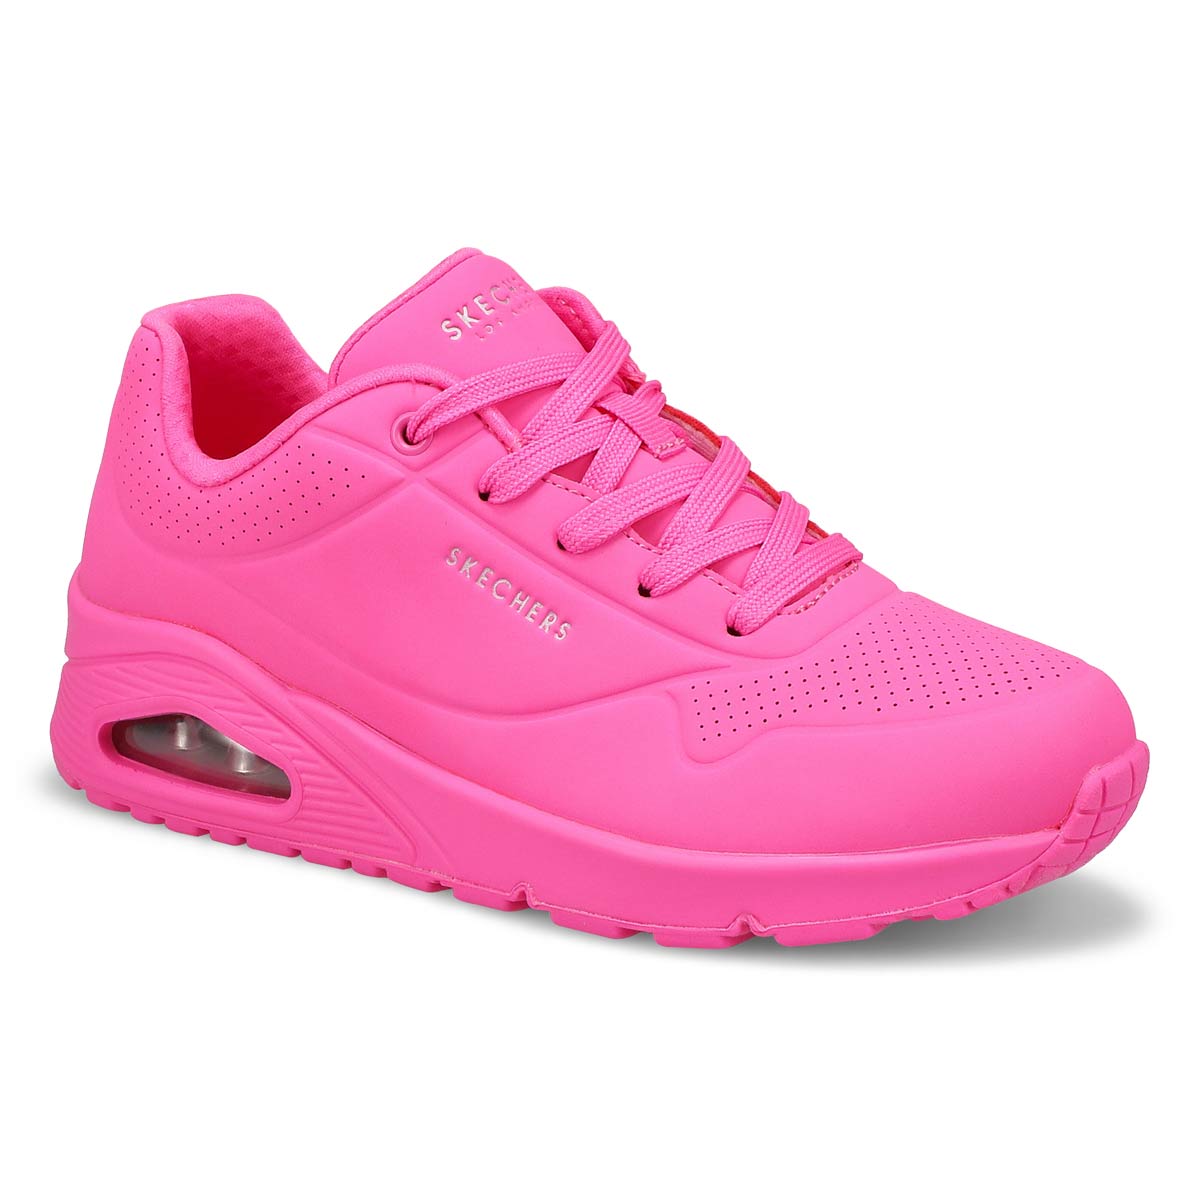 Womens Uno Stand On Air Sneaker - Hot Pink